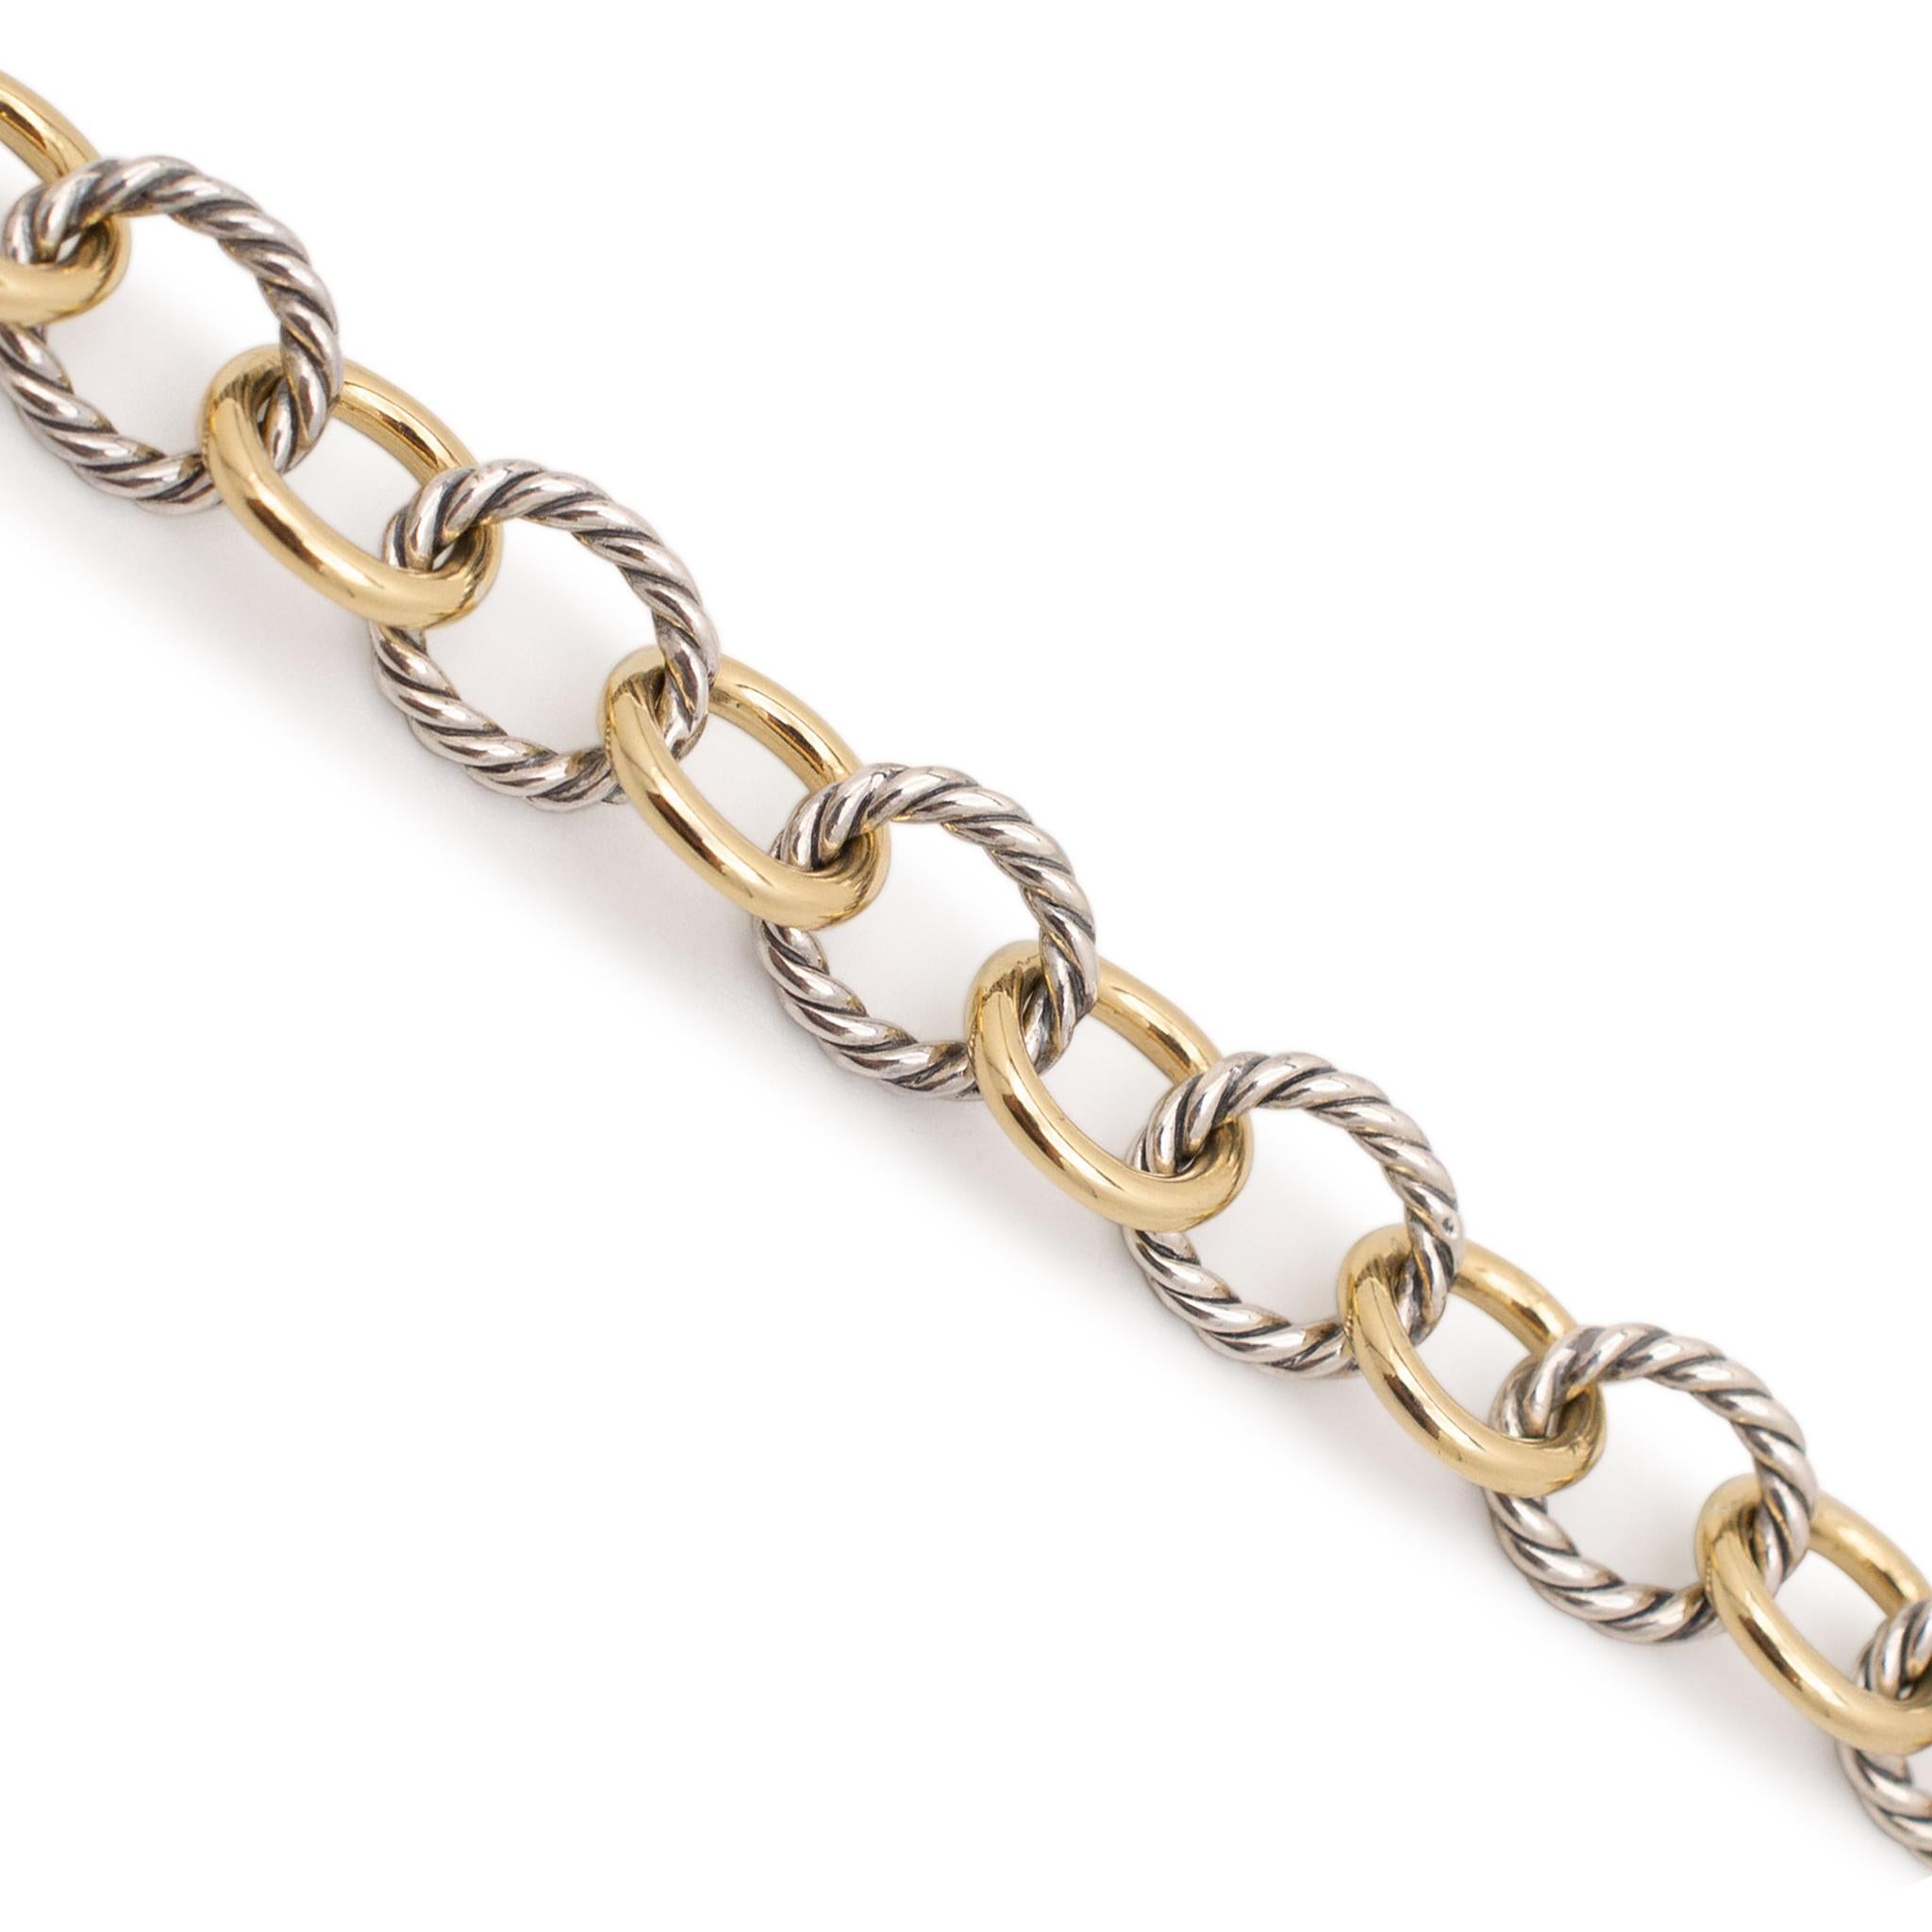 Brand: David Yurman

Metal Type: 925 Sterling Silver & 18K Yellow Gold

Gender: Unisex

Length: 6.75 Inches

Link Width: 8.45mm

Total Weight: 13.52 grams

Engraved with 